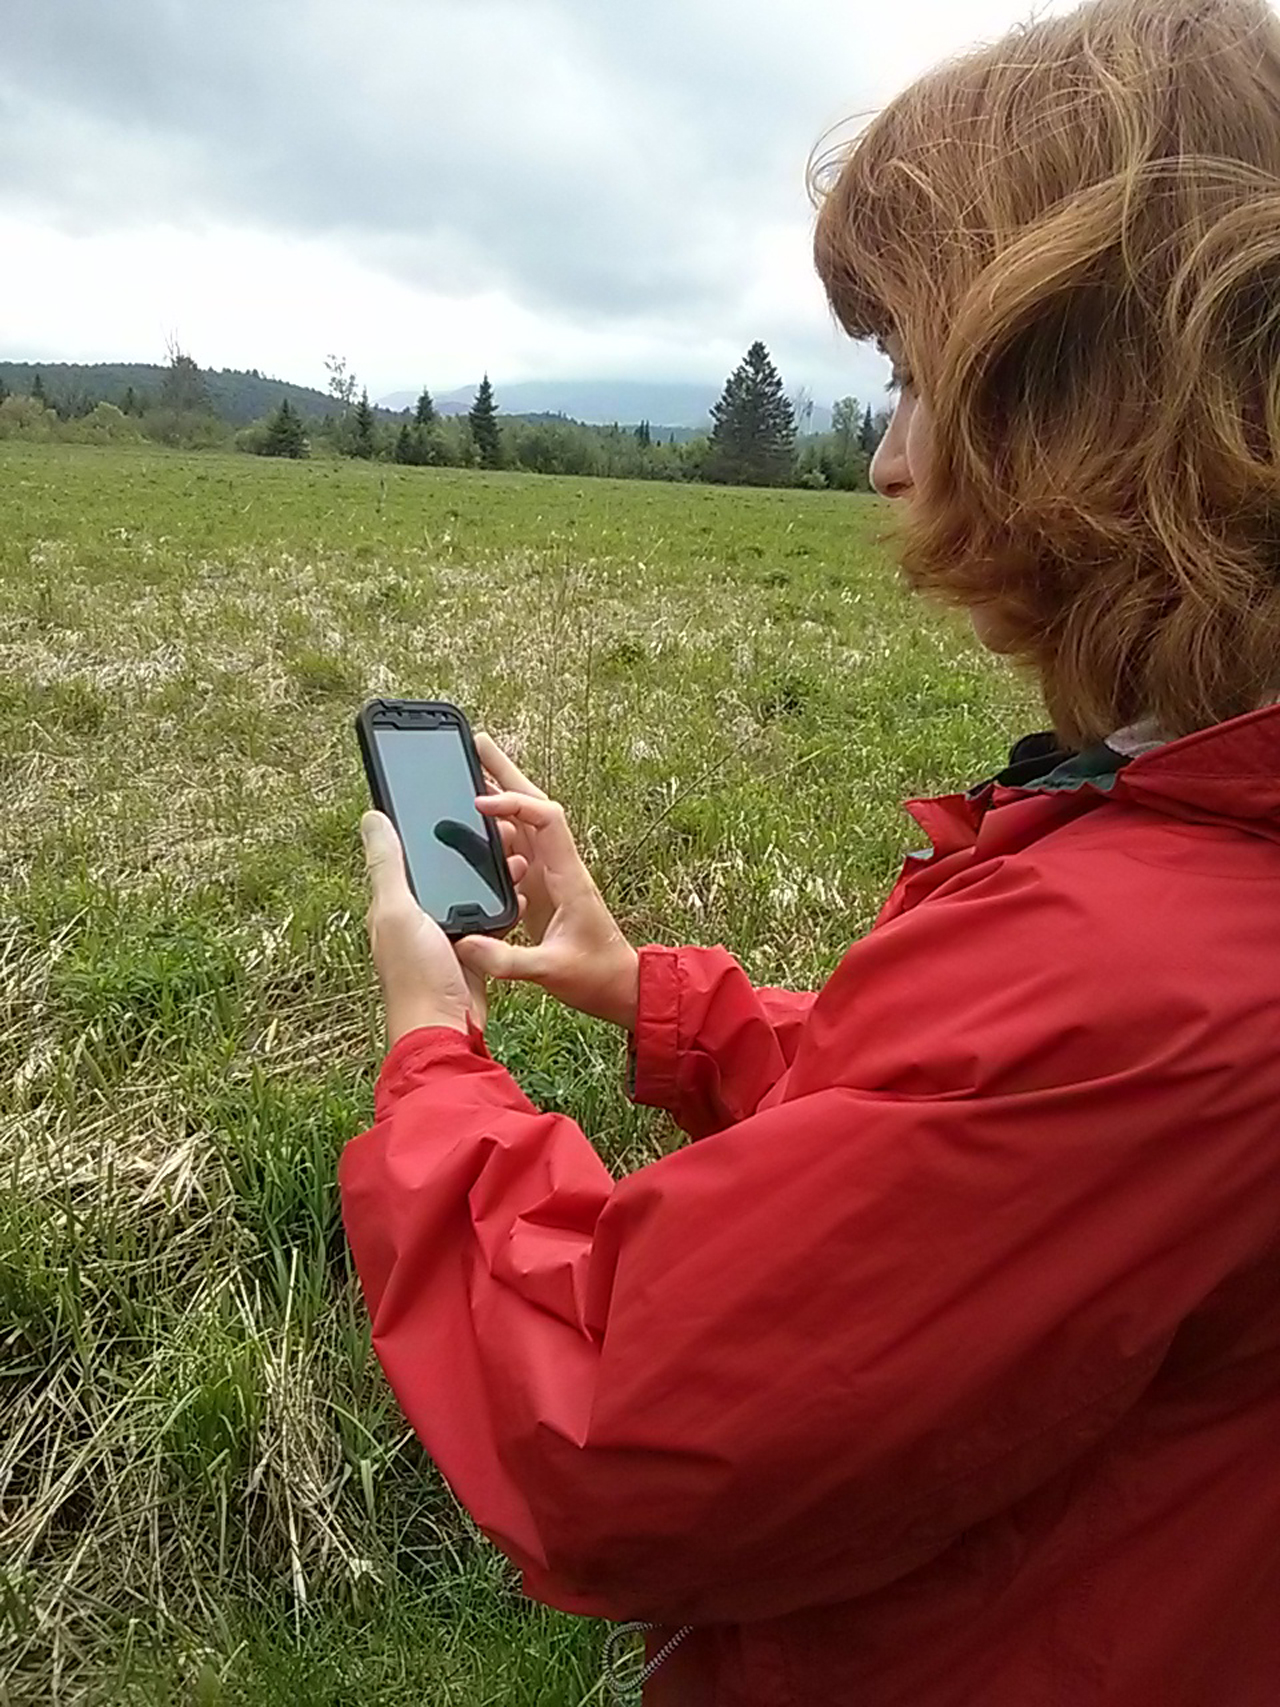 Catilin Stewart of Hamilton County Soil and Water District collects data about invasive species at the Intervale Lowlands Preserve of Lake Placid, NY, on the iMapInvasives mobile app. Photo © Jennifer Dean